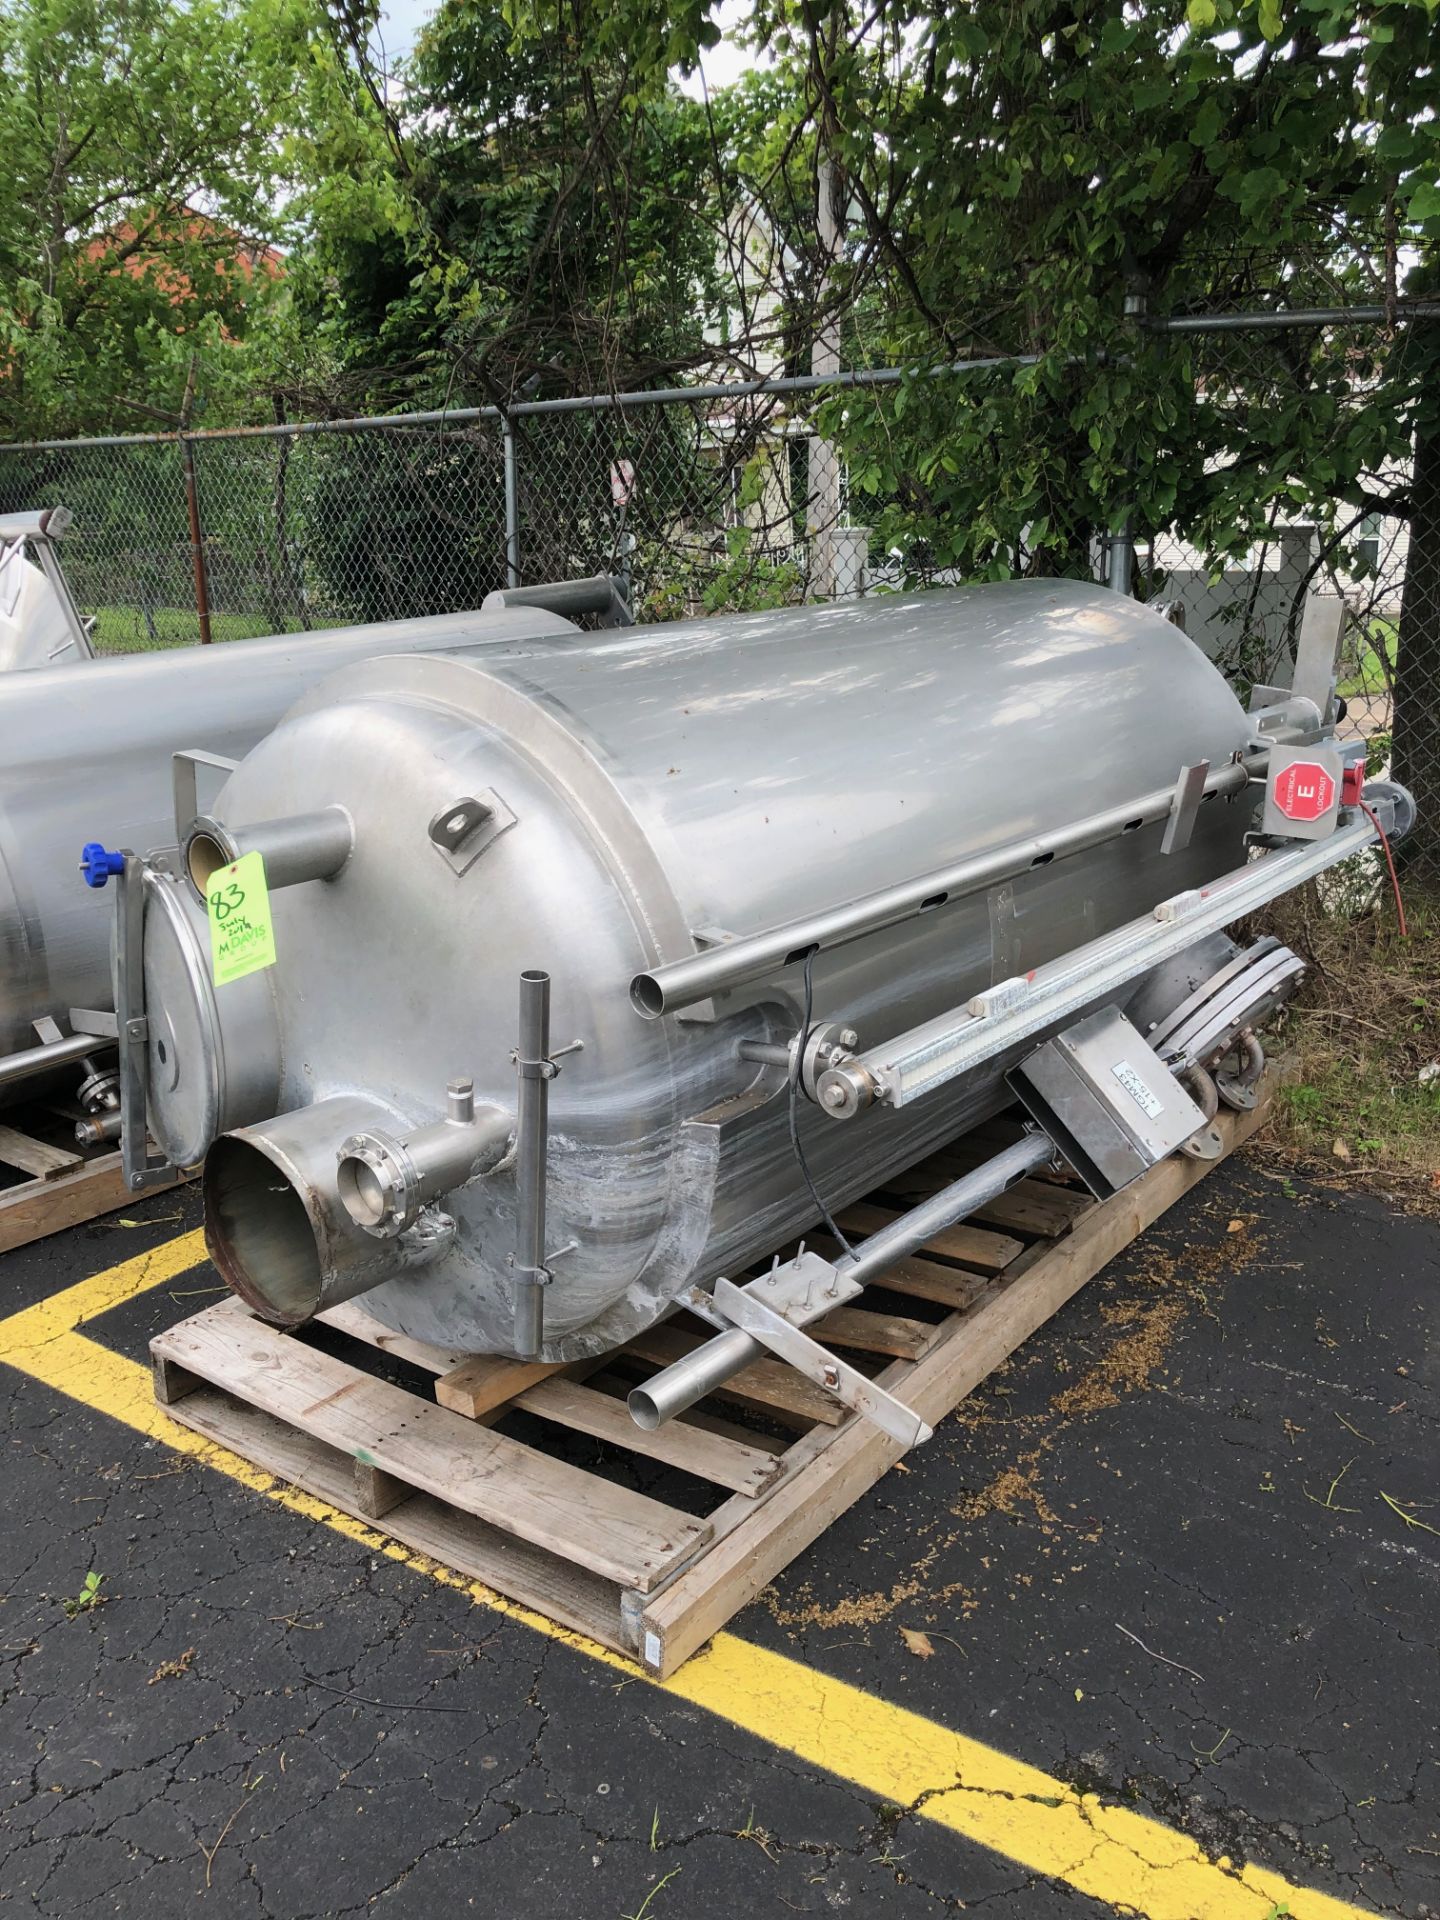 KSR Kuebler BNA Approx. 350 gallons Insulated S/S Tank, S/N 834491-1/2009, Equipped with Heat - Image 2 of 11